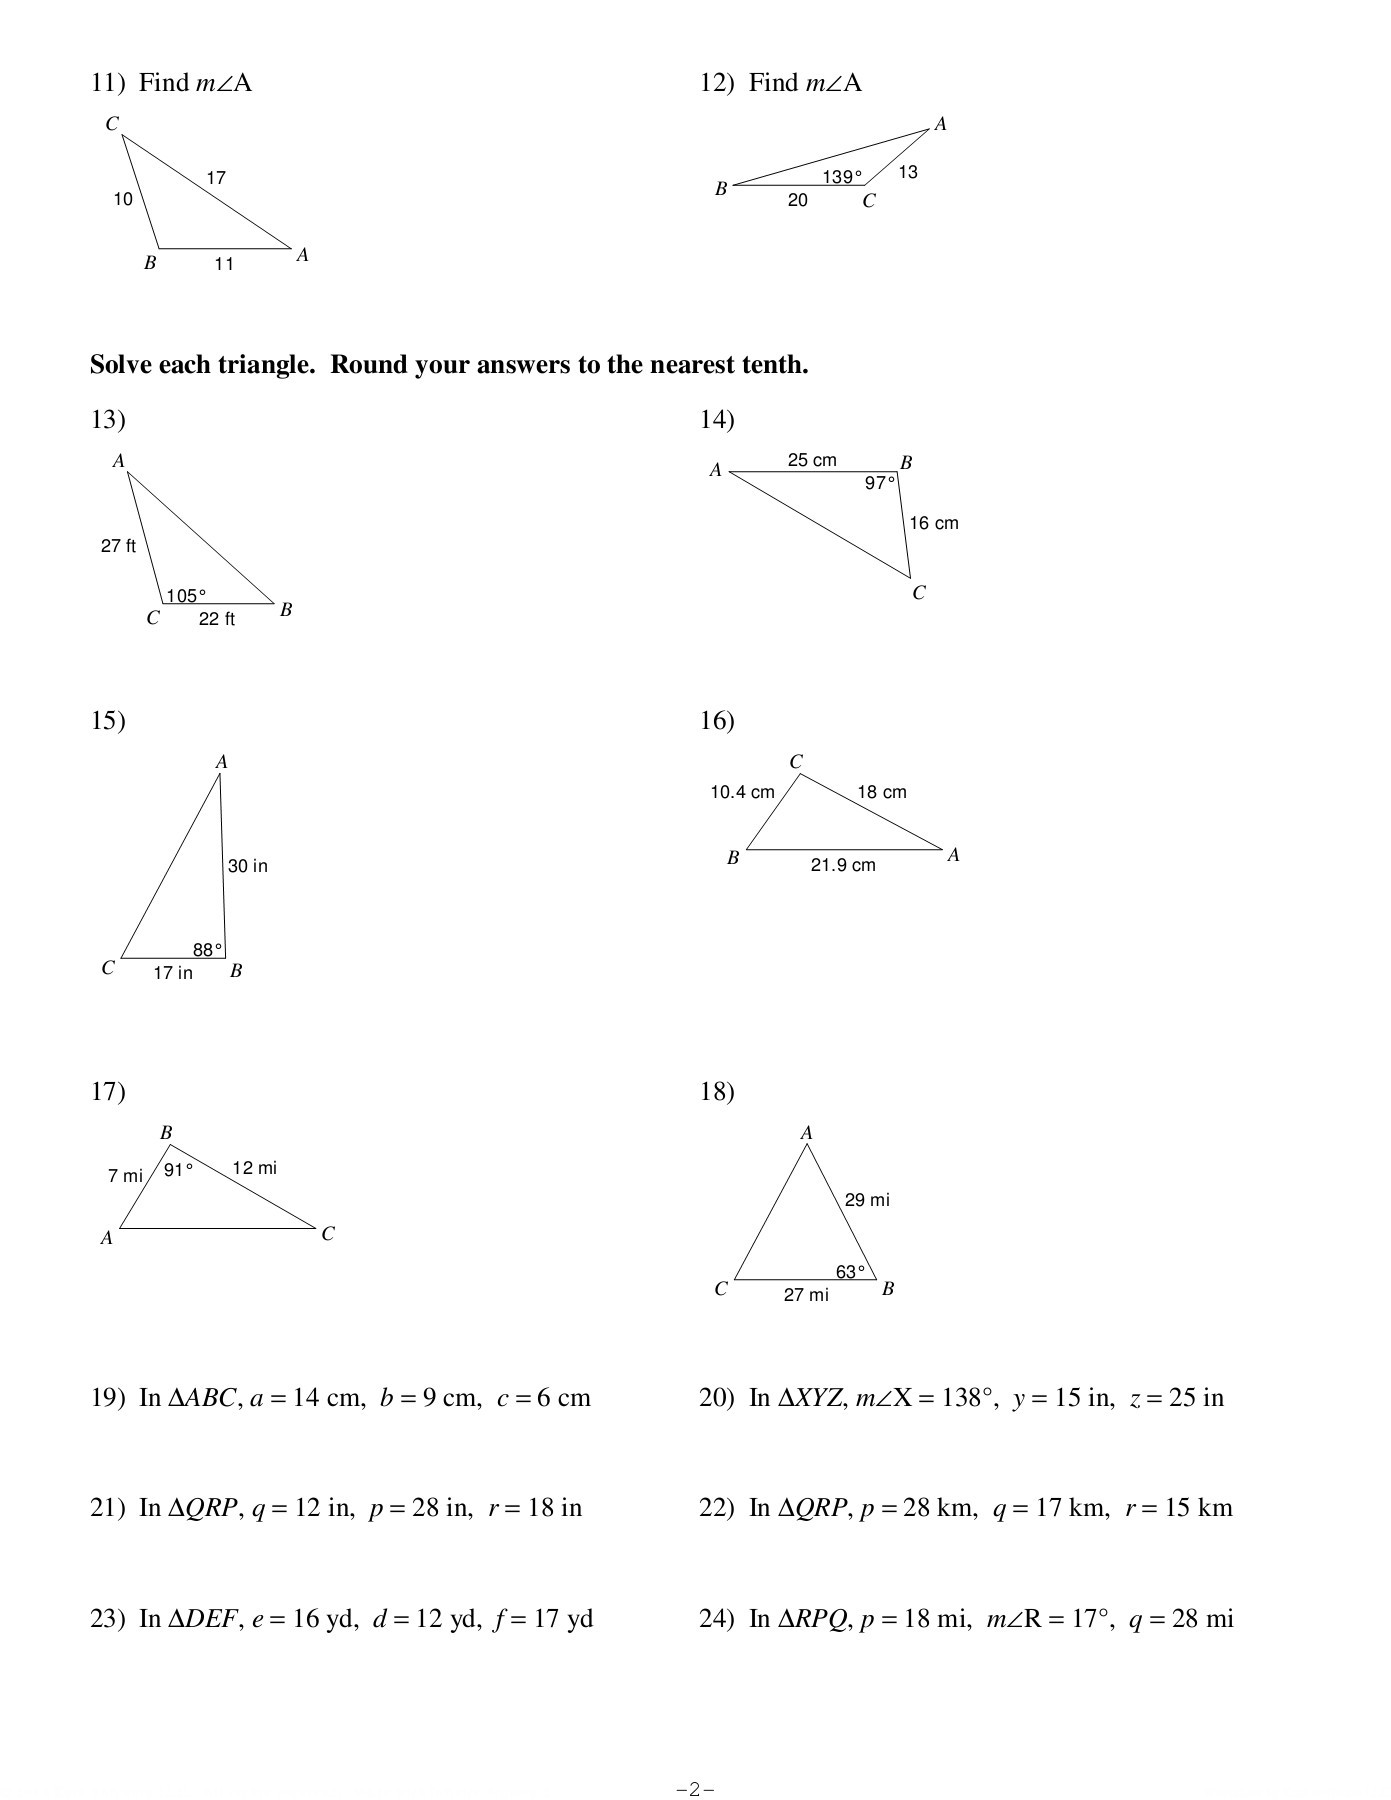 Law Of Cosines Worksheet Law Of Cosines Pages 1 4 Text Version